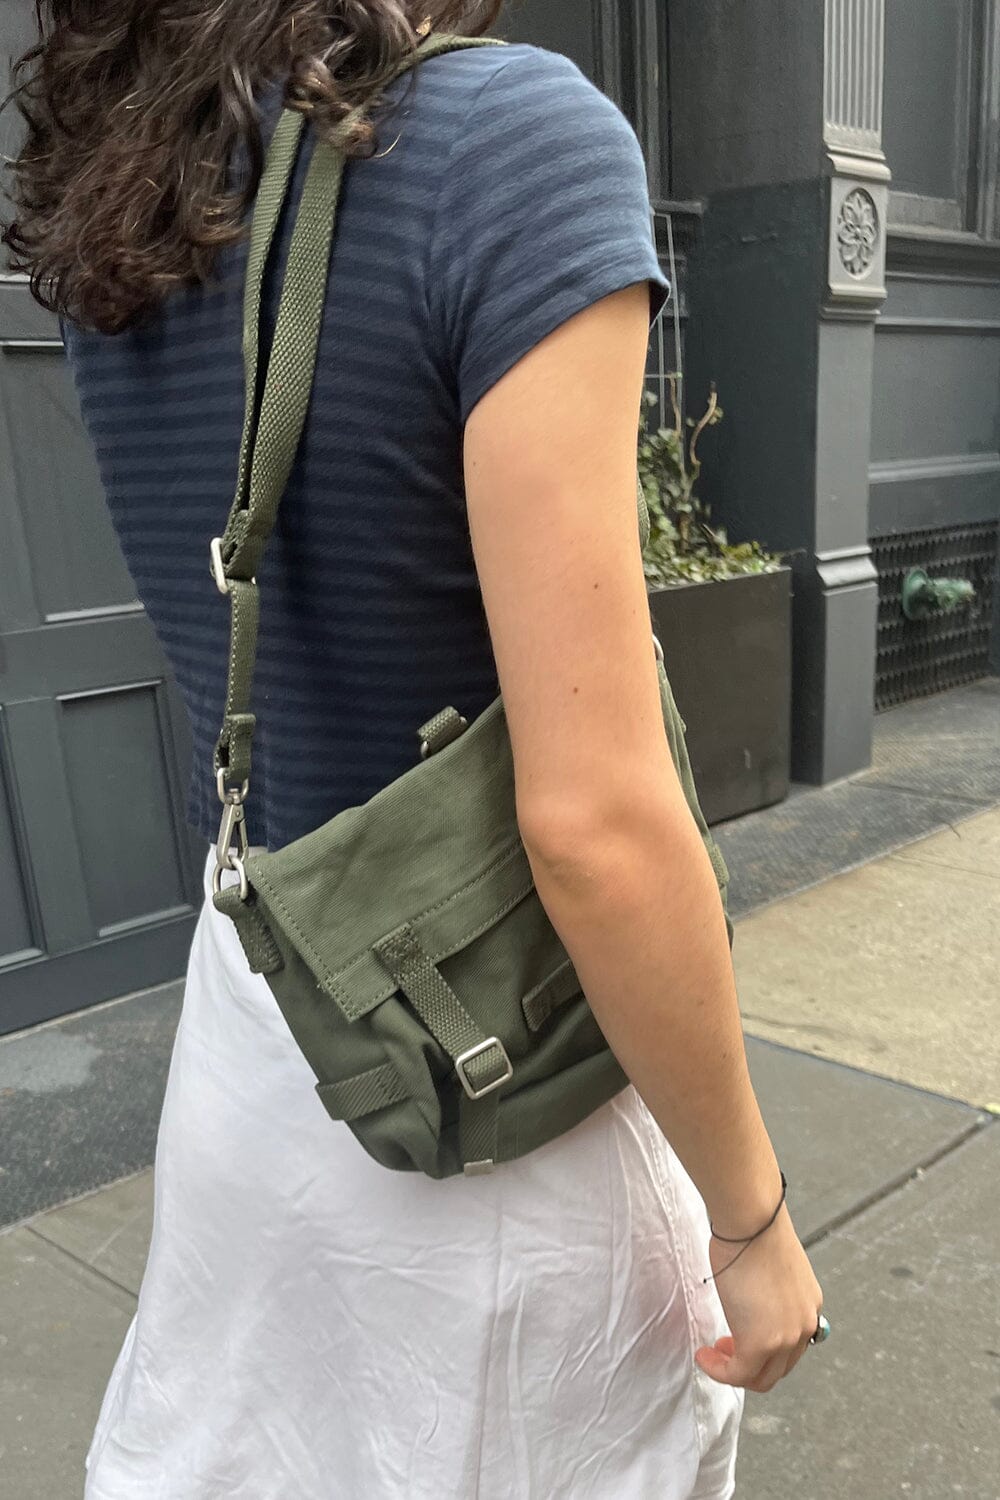 Messenger Style Bags